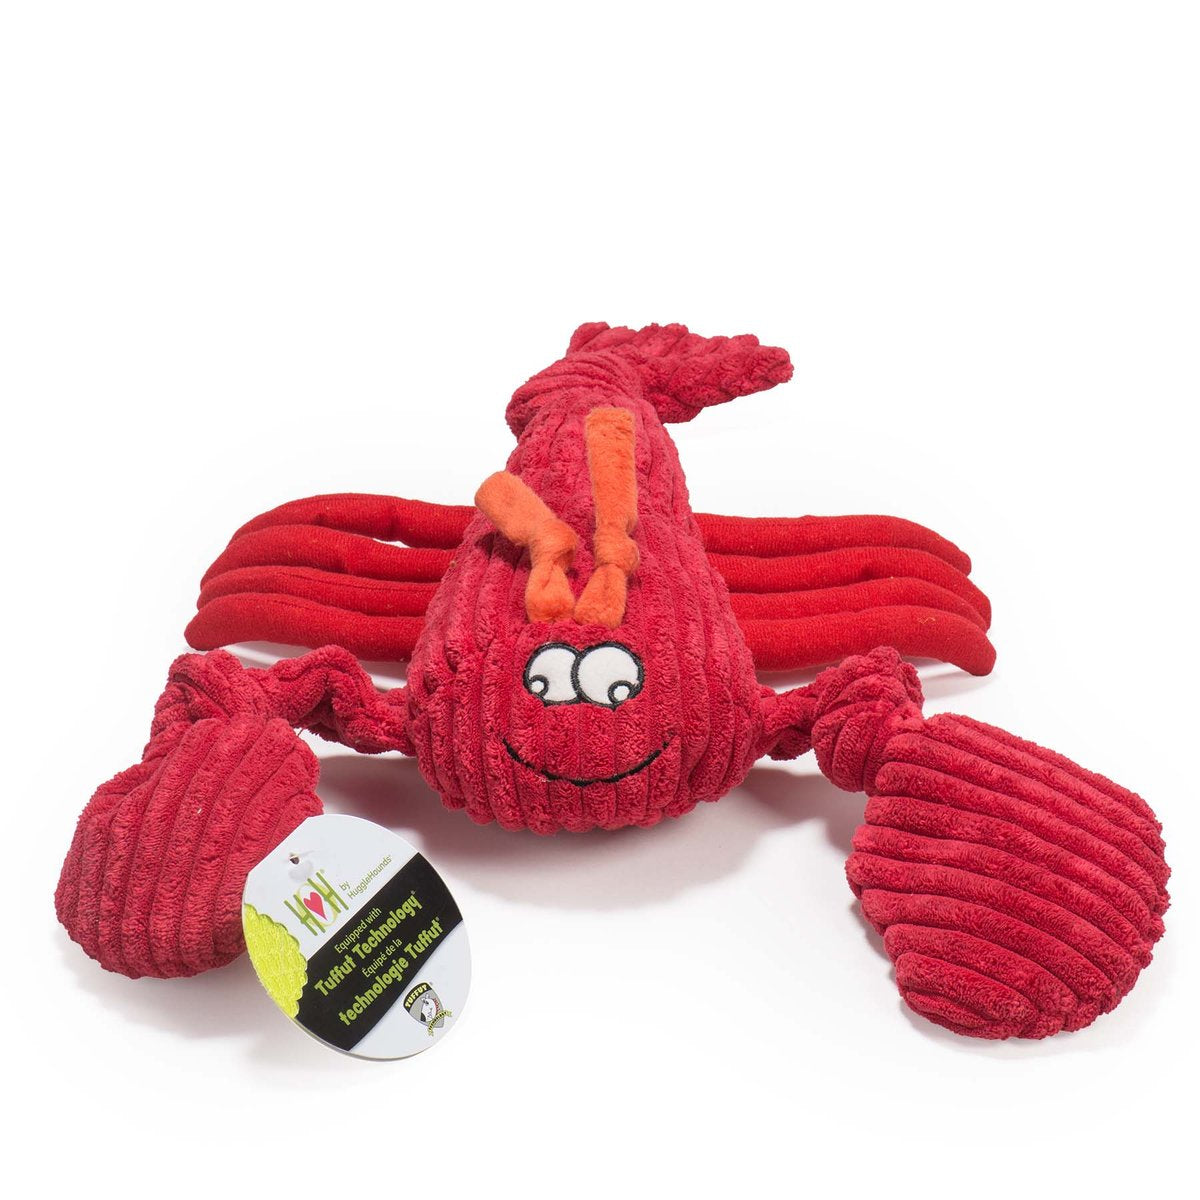 HuggleHounds Knottie Durable Squeaky Plush Dog Toy, Lobsta